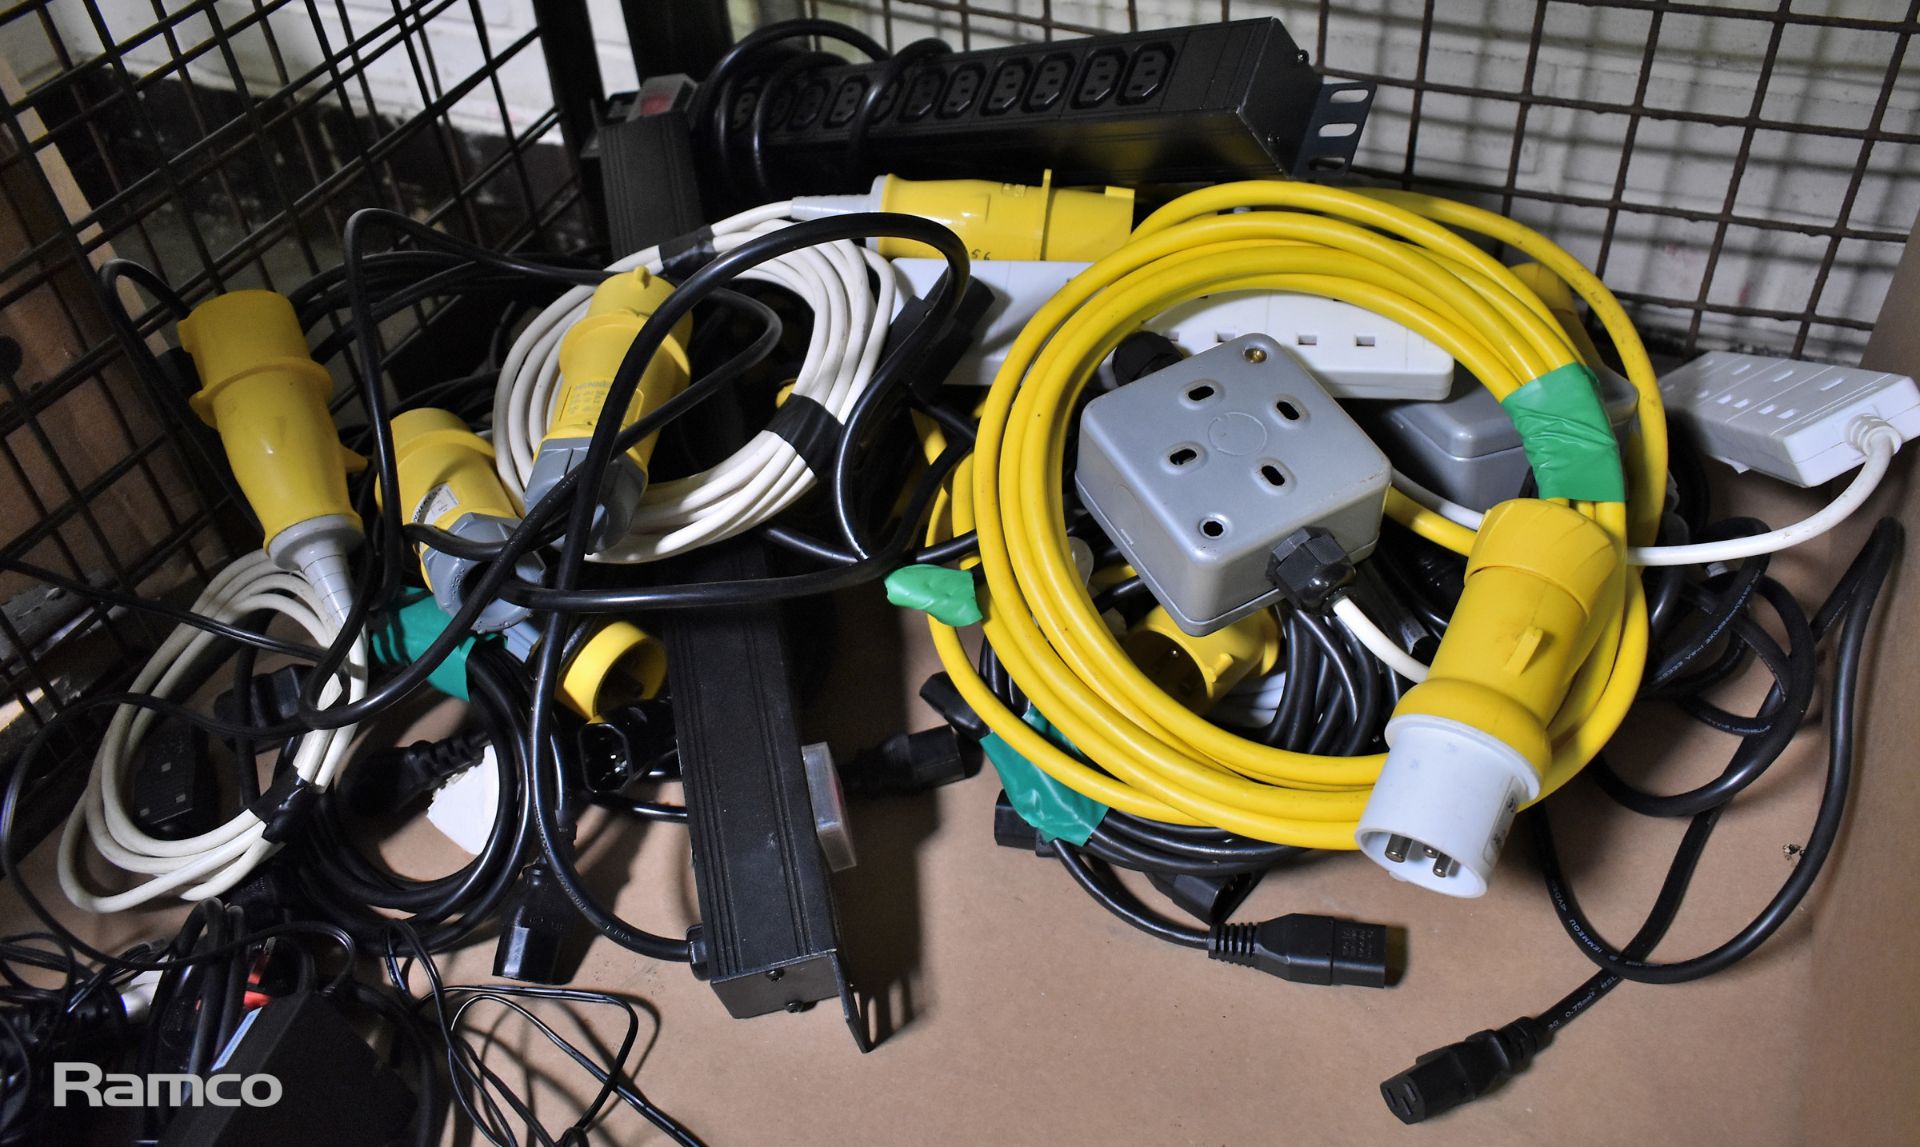 Electrical accessories - 110V multi gang 3 pin and IEC C13 extension leads, headphones - Image 3 of 6